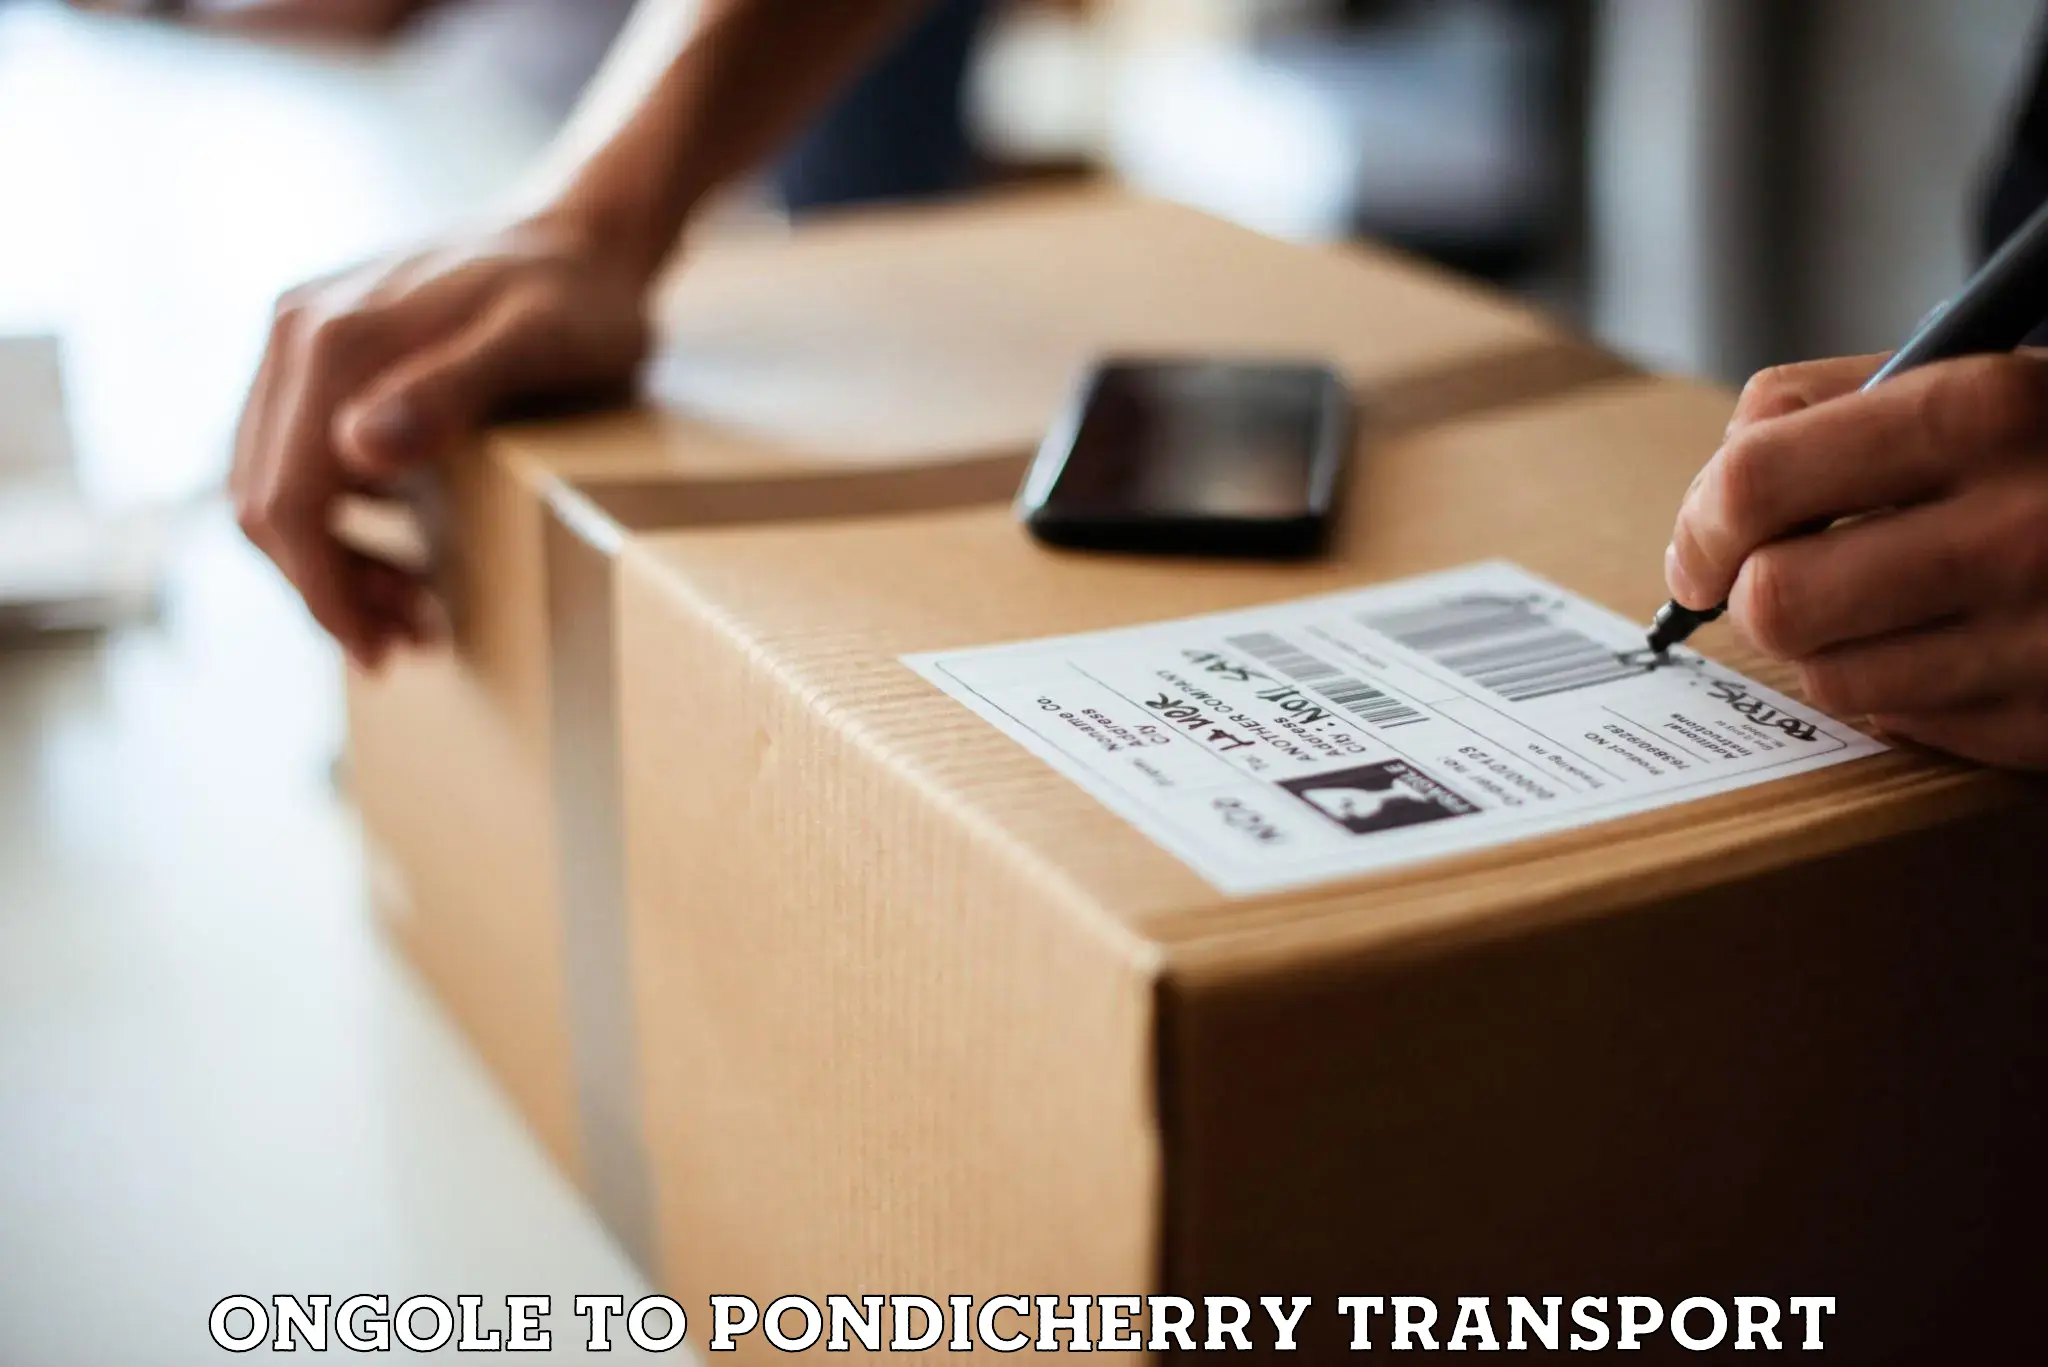 Two wheeler parcel service Ongole to Pondicherry